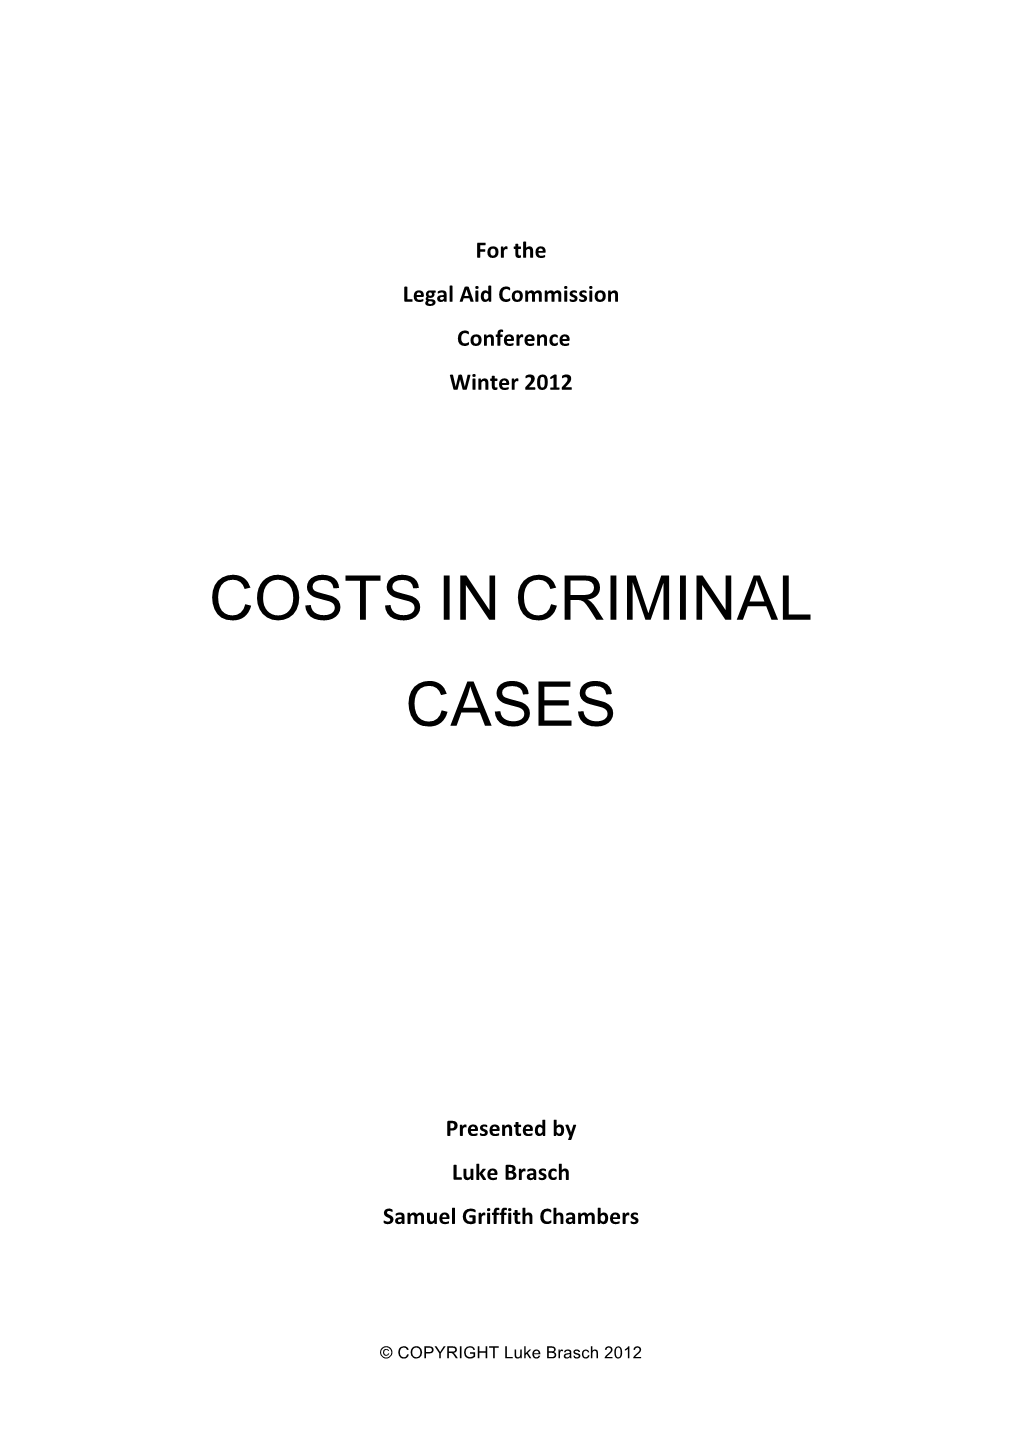 Costs in Criminal Cases